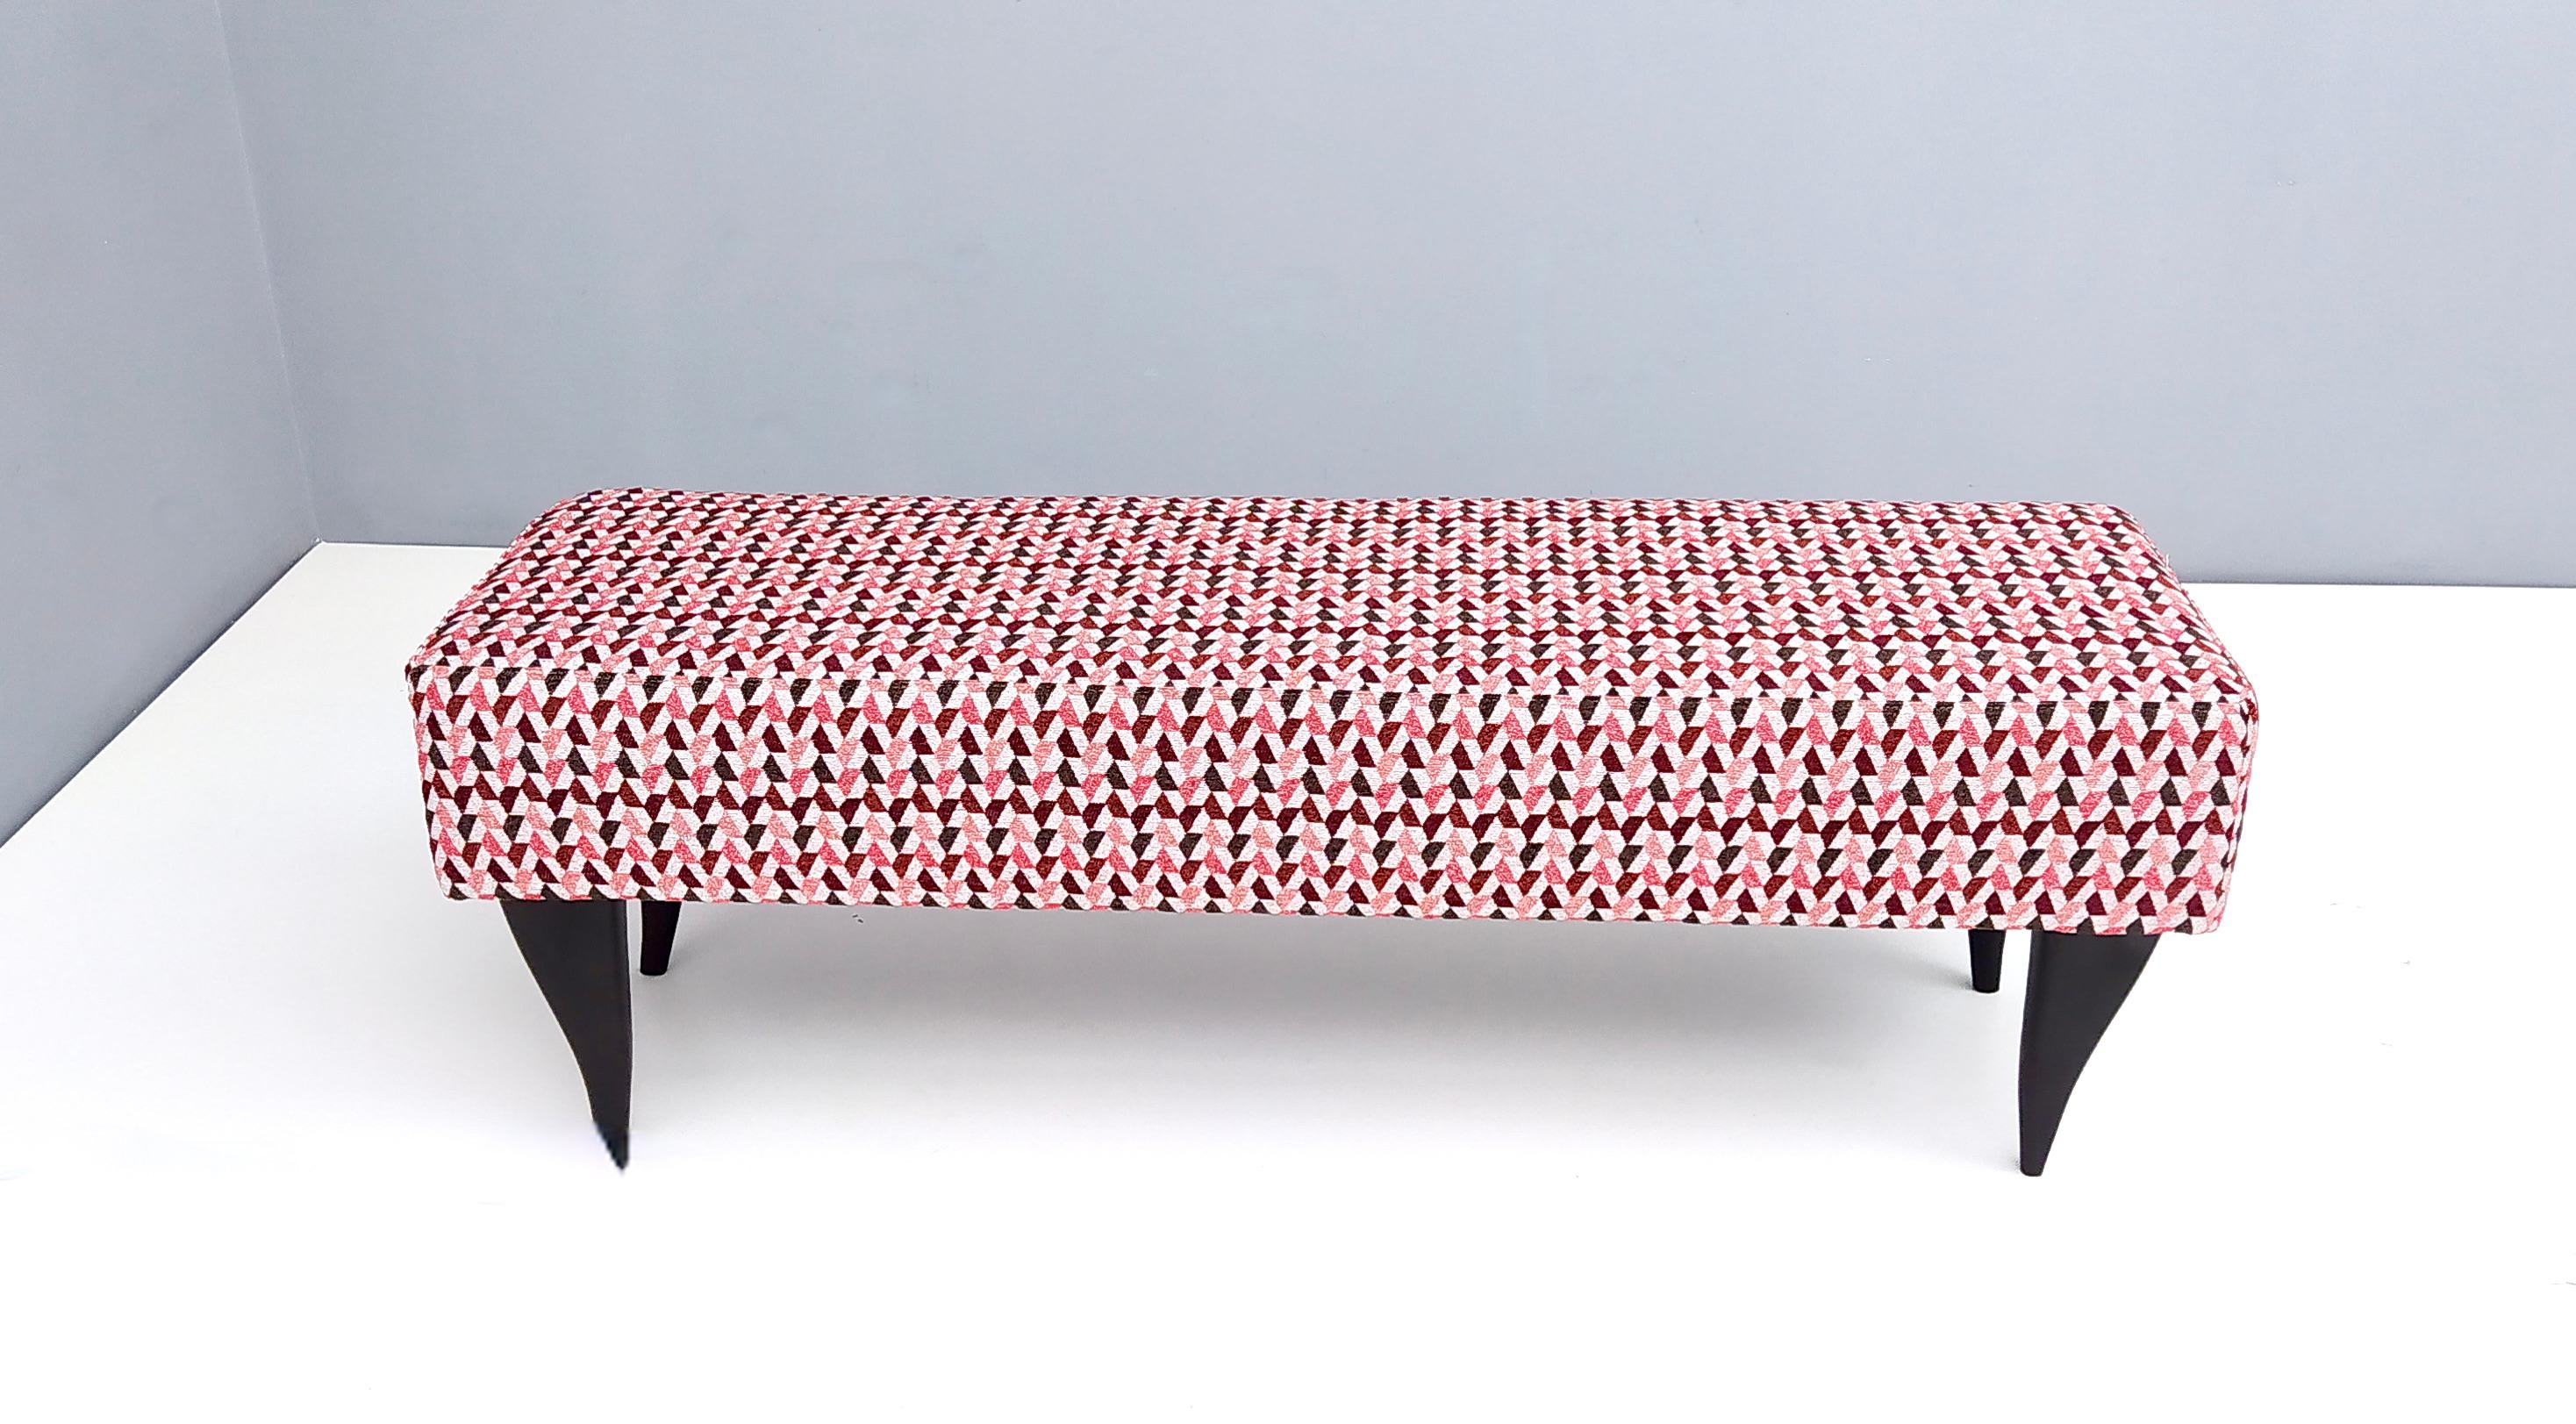 Pair of Vintage Benches with Red Patterned Fabric Upholstery, Italy In Excellent Condition For Sale In Bresso, Lombardy